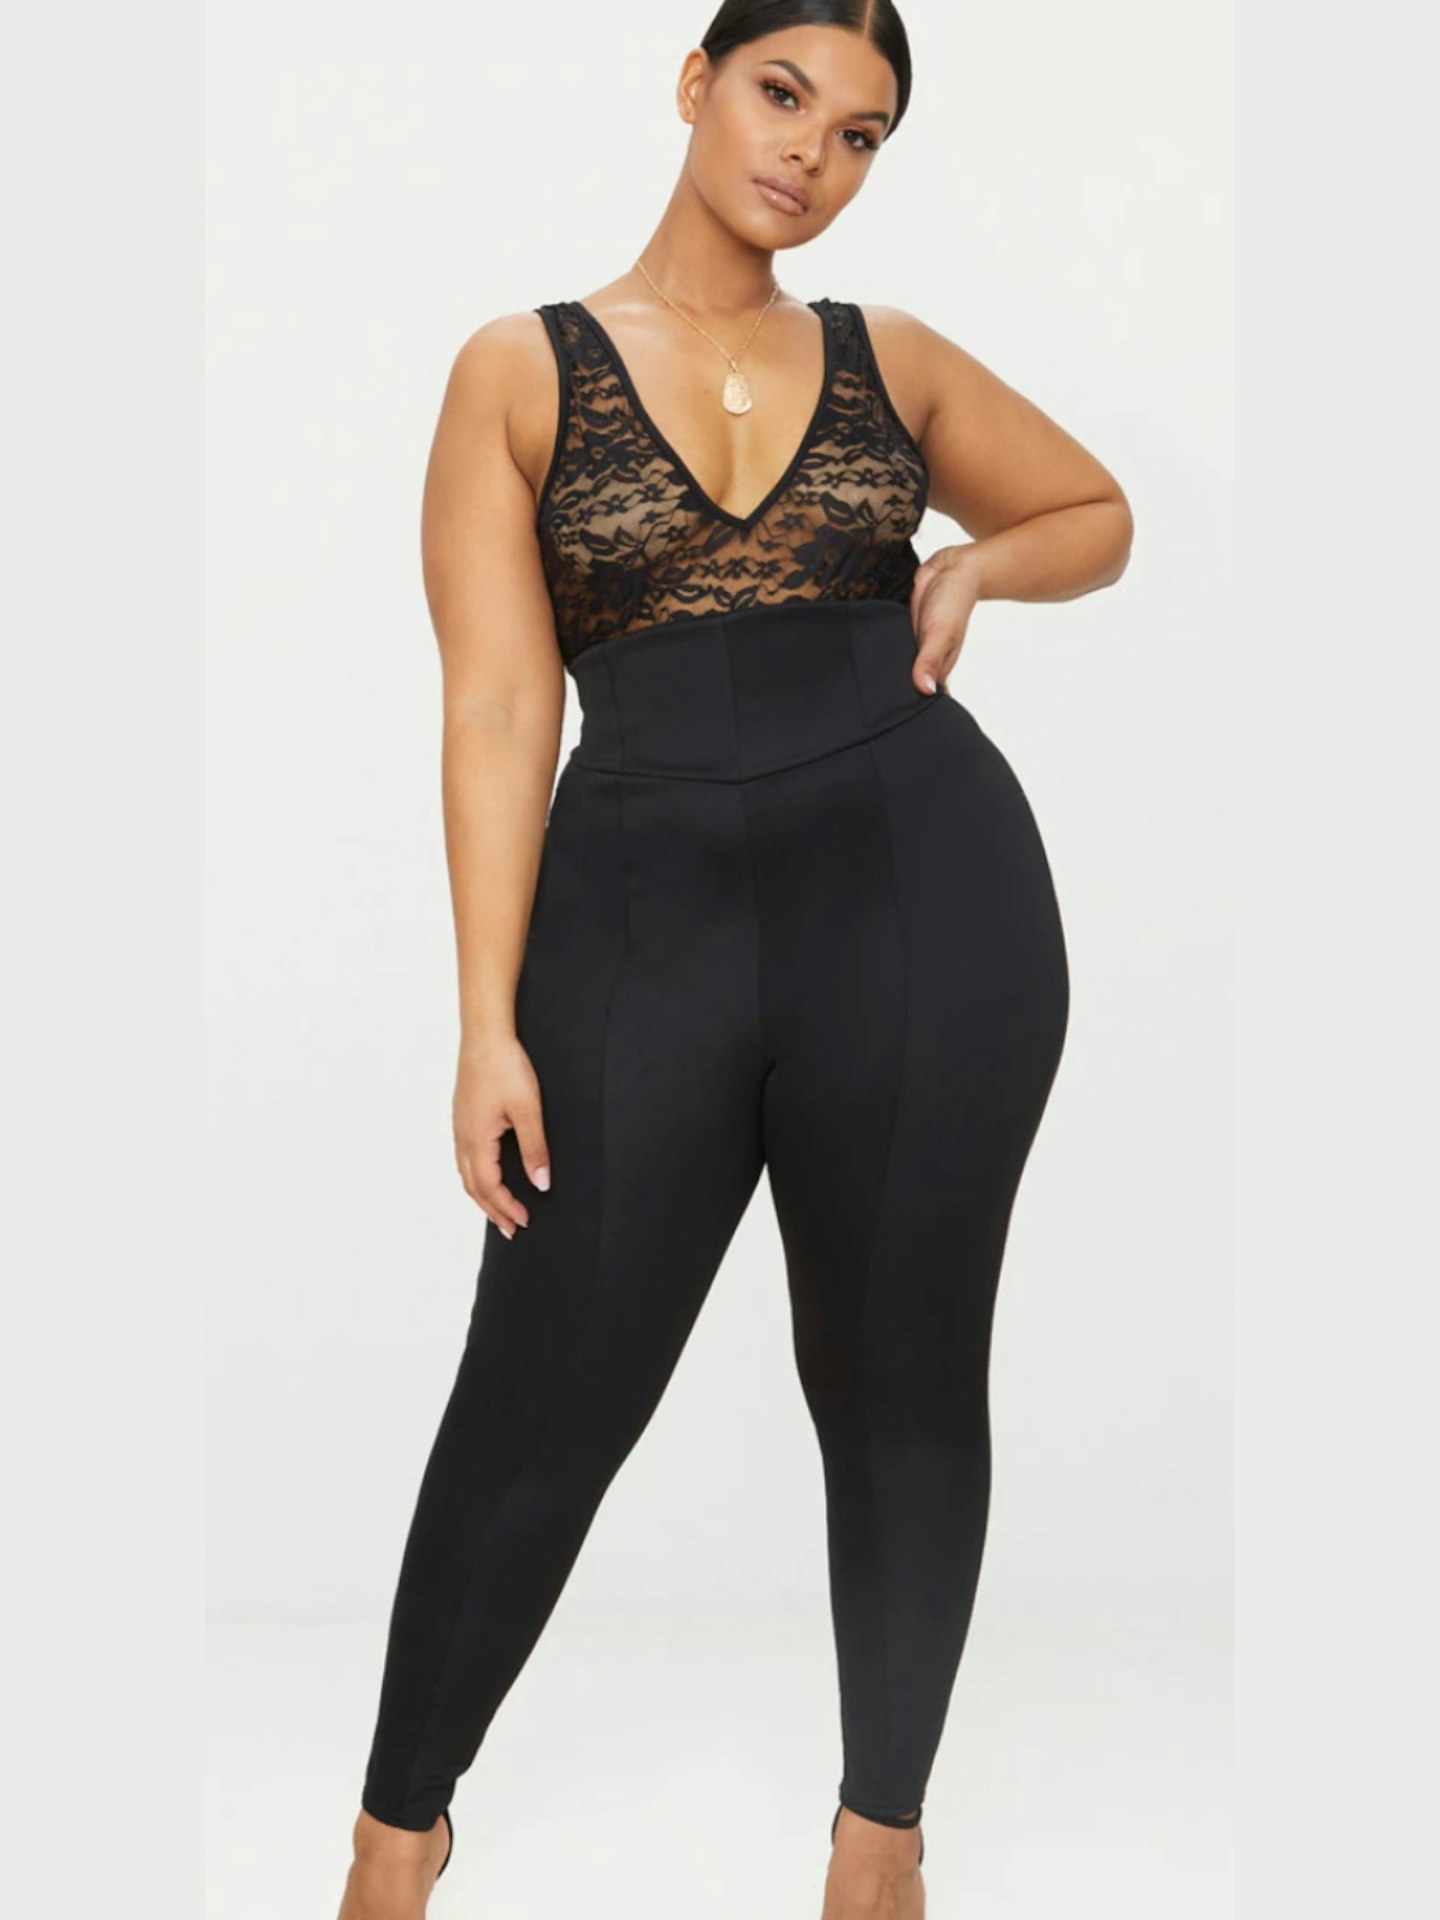 The Best Plus-Size Leggings UK: Where To Shop